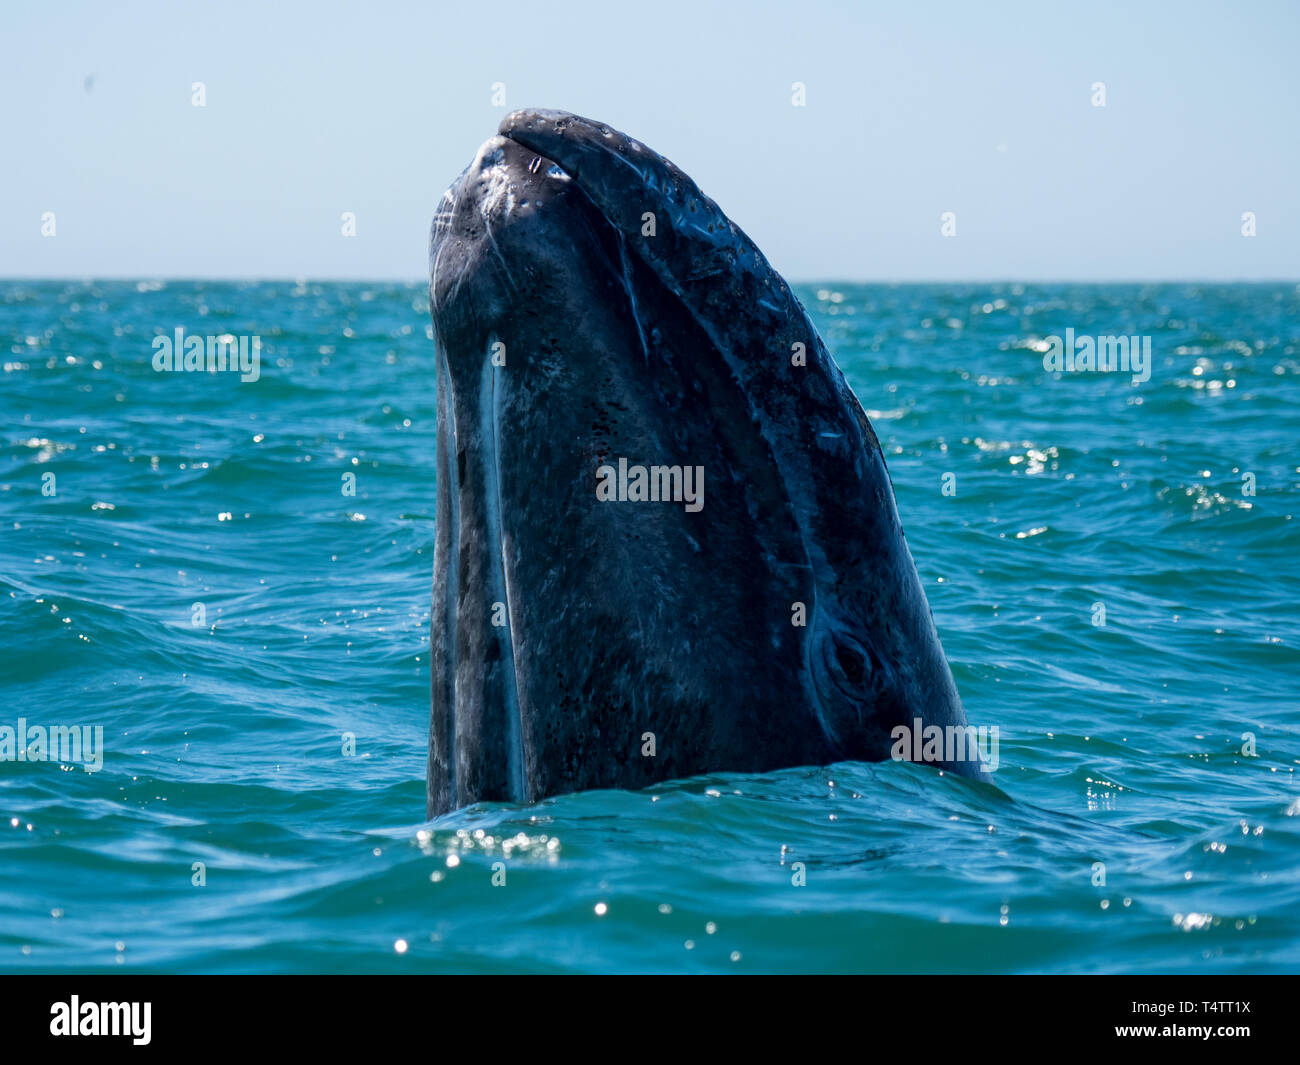 A curious gray whale and excited nature tourists in San Ignacio lagoon, Baja California Sur, Mexico Stock Photo